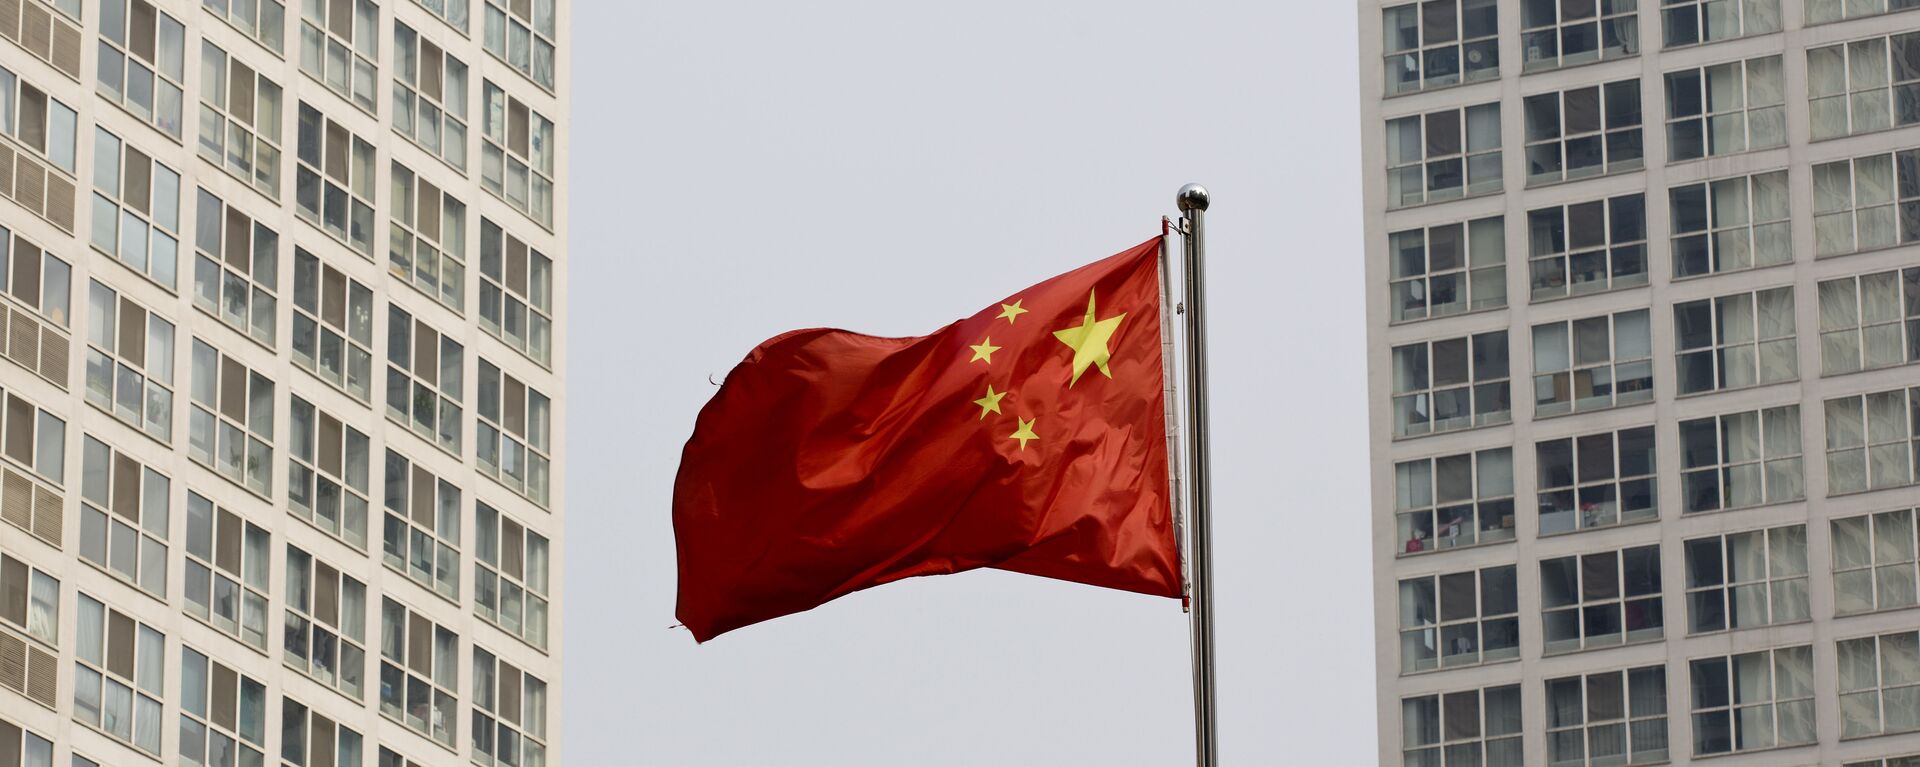 A Chinese national flag flutters in the wind in between a high-rise residential and office complex in Beijing, China. (File) - Sputnik International, 1920, 24.02.2023